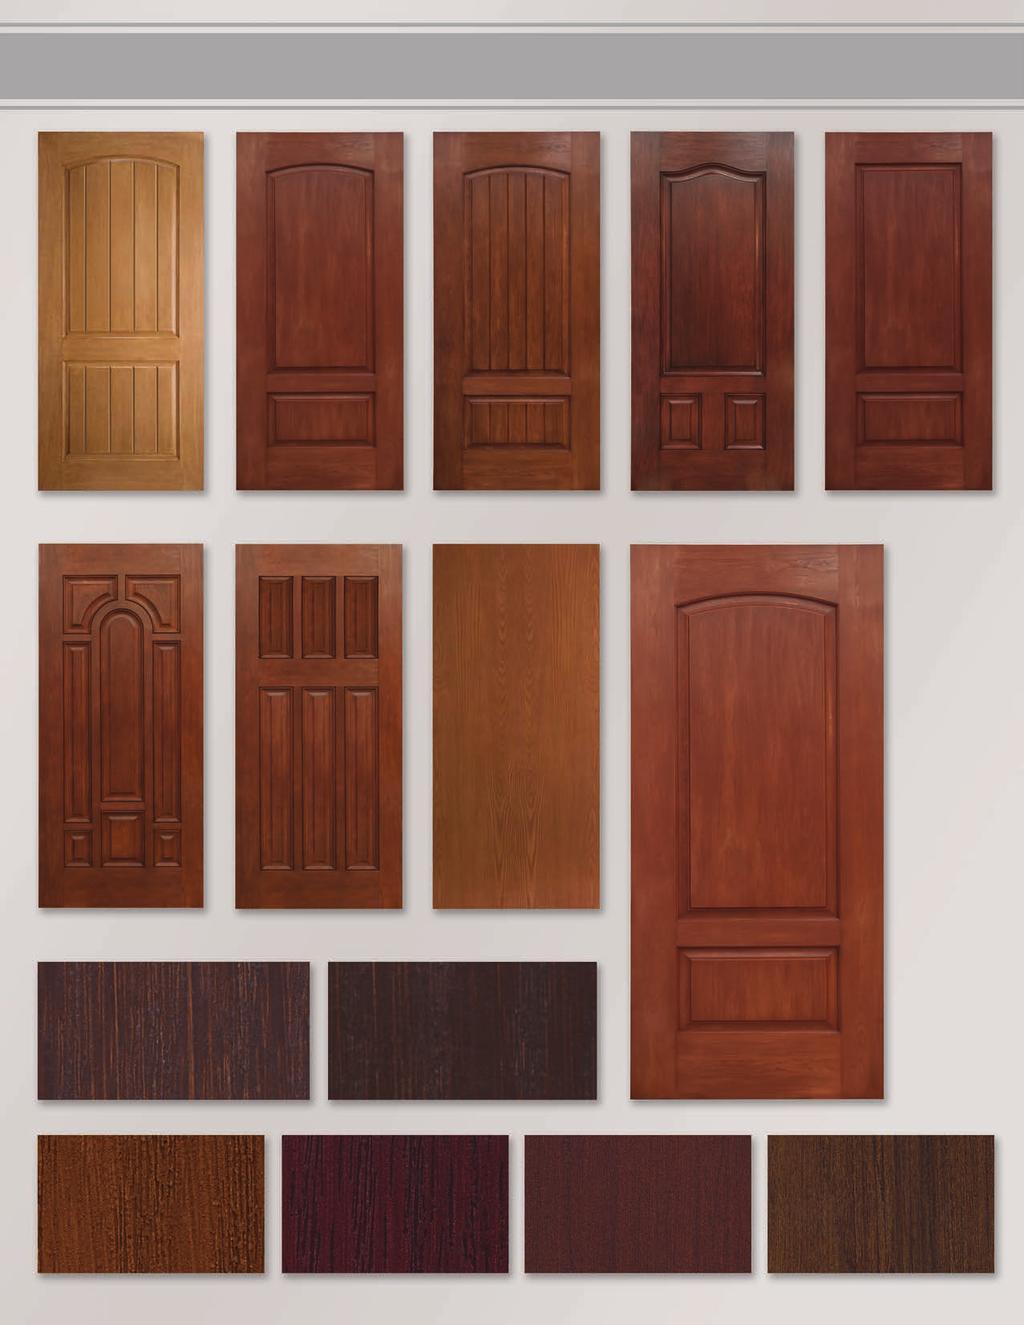 Textured Fiberglass & Stains Rustic Mahogany 2 Panel Plank 2 panel camber-top cherry 2 Panel camber-top plank, cherry WG-3PA Available Widths 32, 34, 36 WG-2EM Available Widths 32, 34,